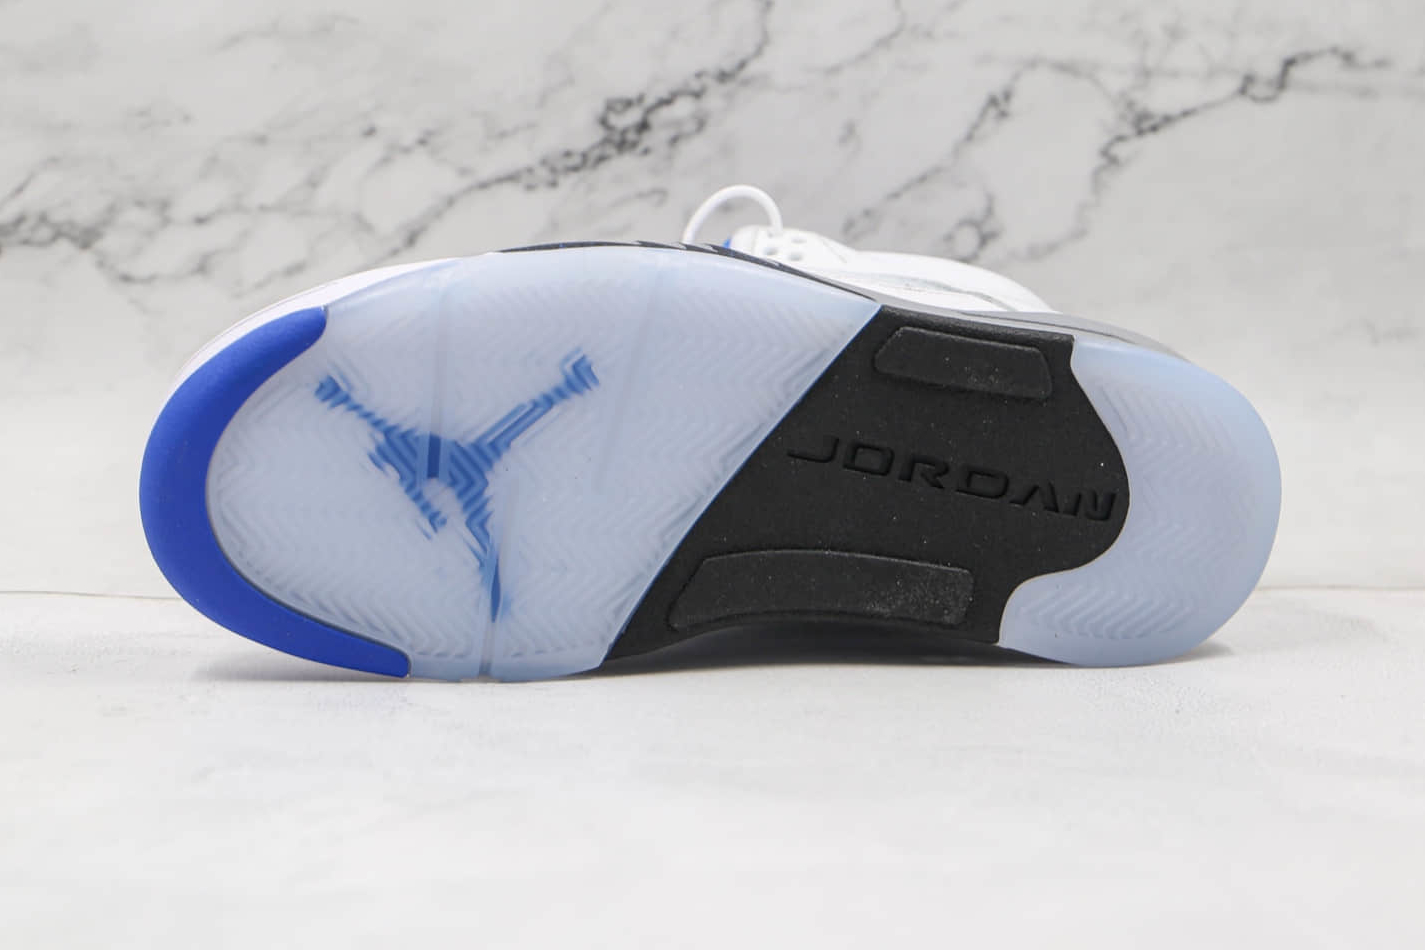 Air Jordan 5 Hyper Royal White Blue Grey Shoes DC0587-140 | Stylish and Iconic Sneakers